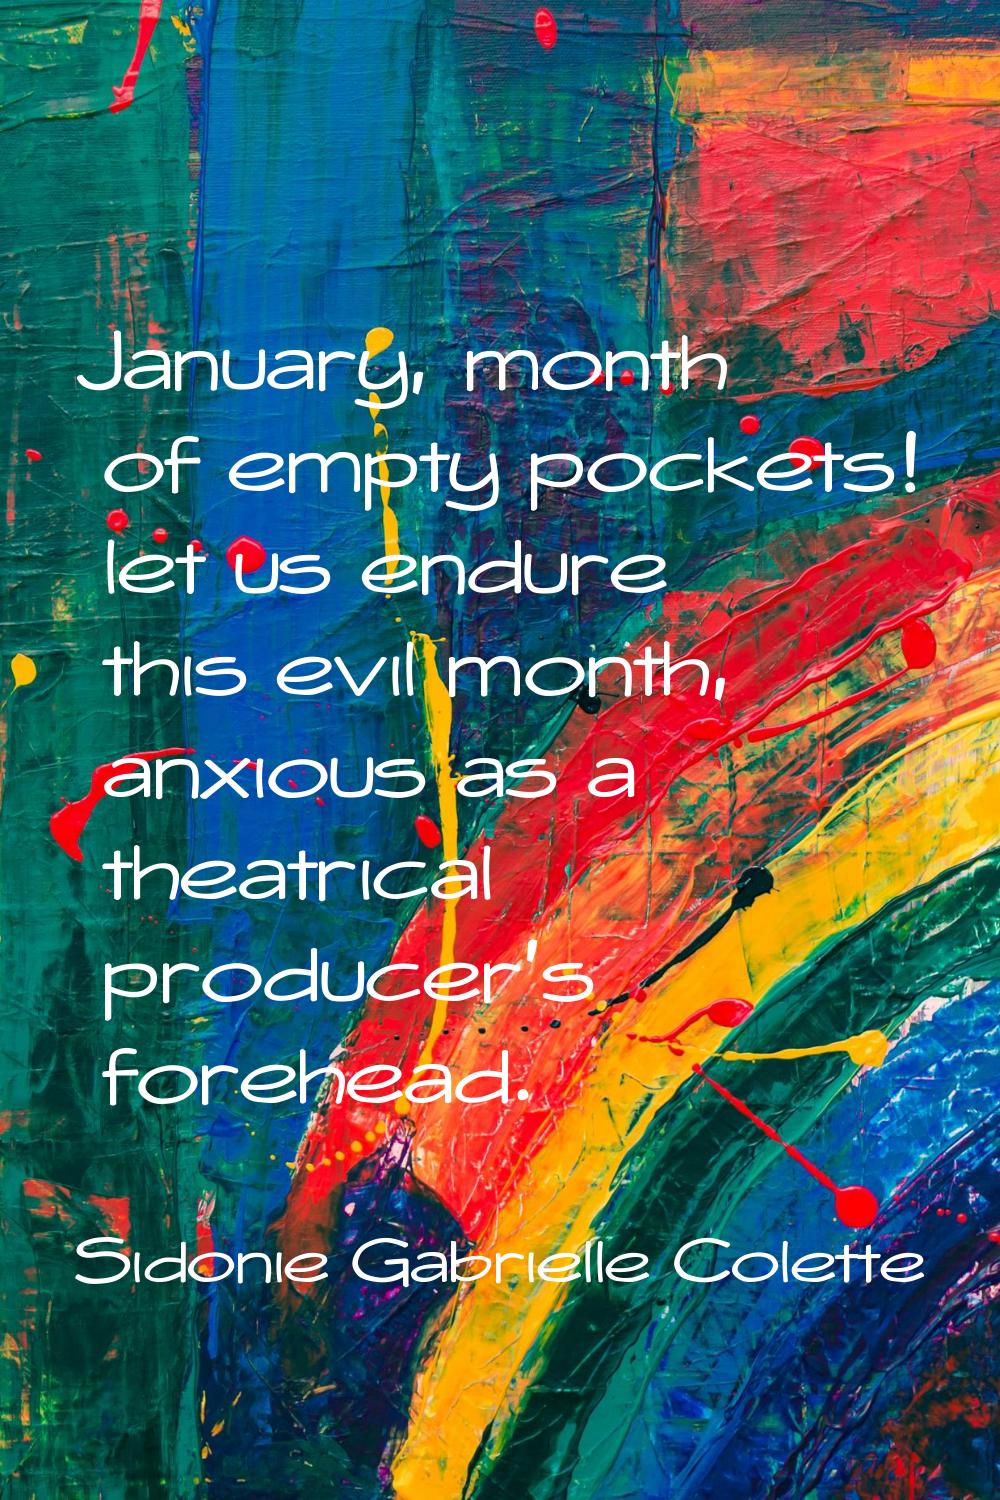 January, month of empty pockets! let us endure this evil month, anxious as a theatrical producer's 